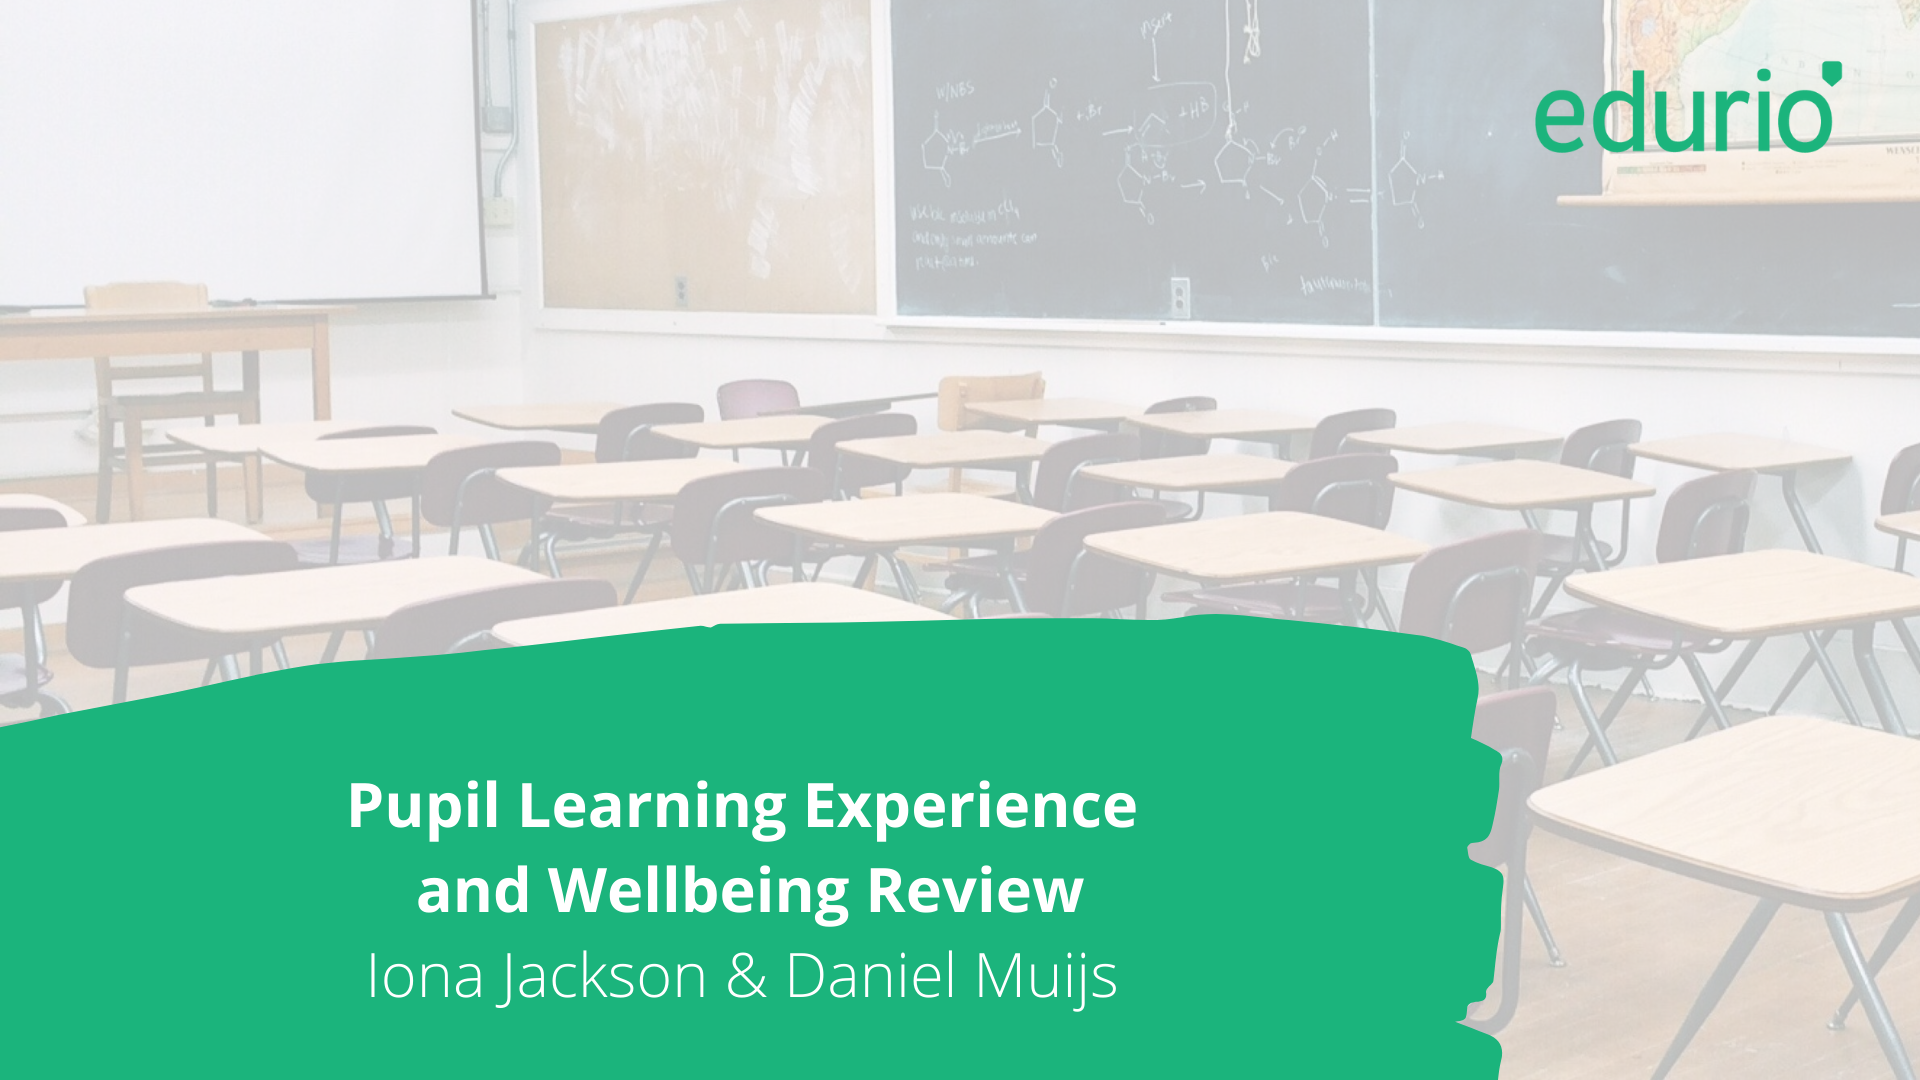 Pupil Learning Experience and Wellbeing Review